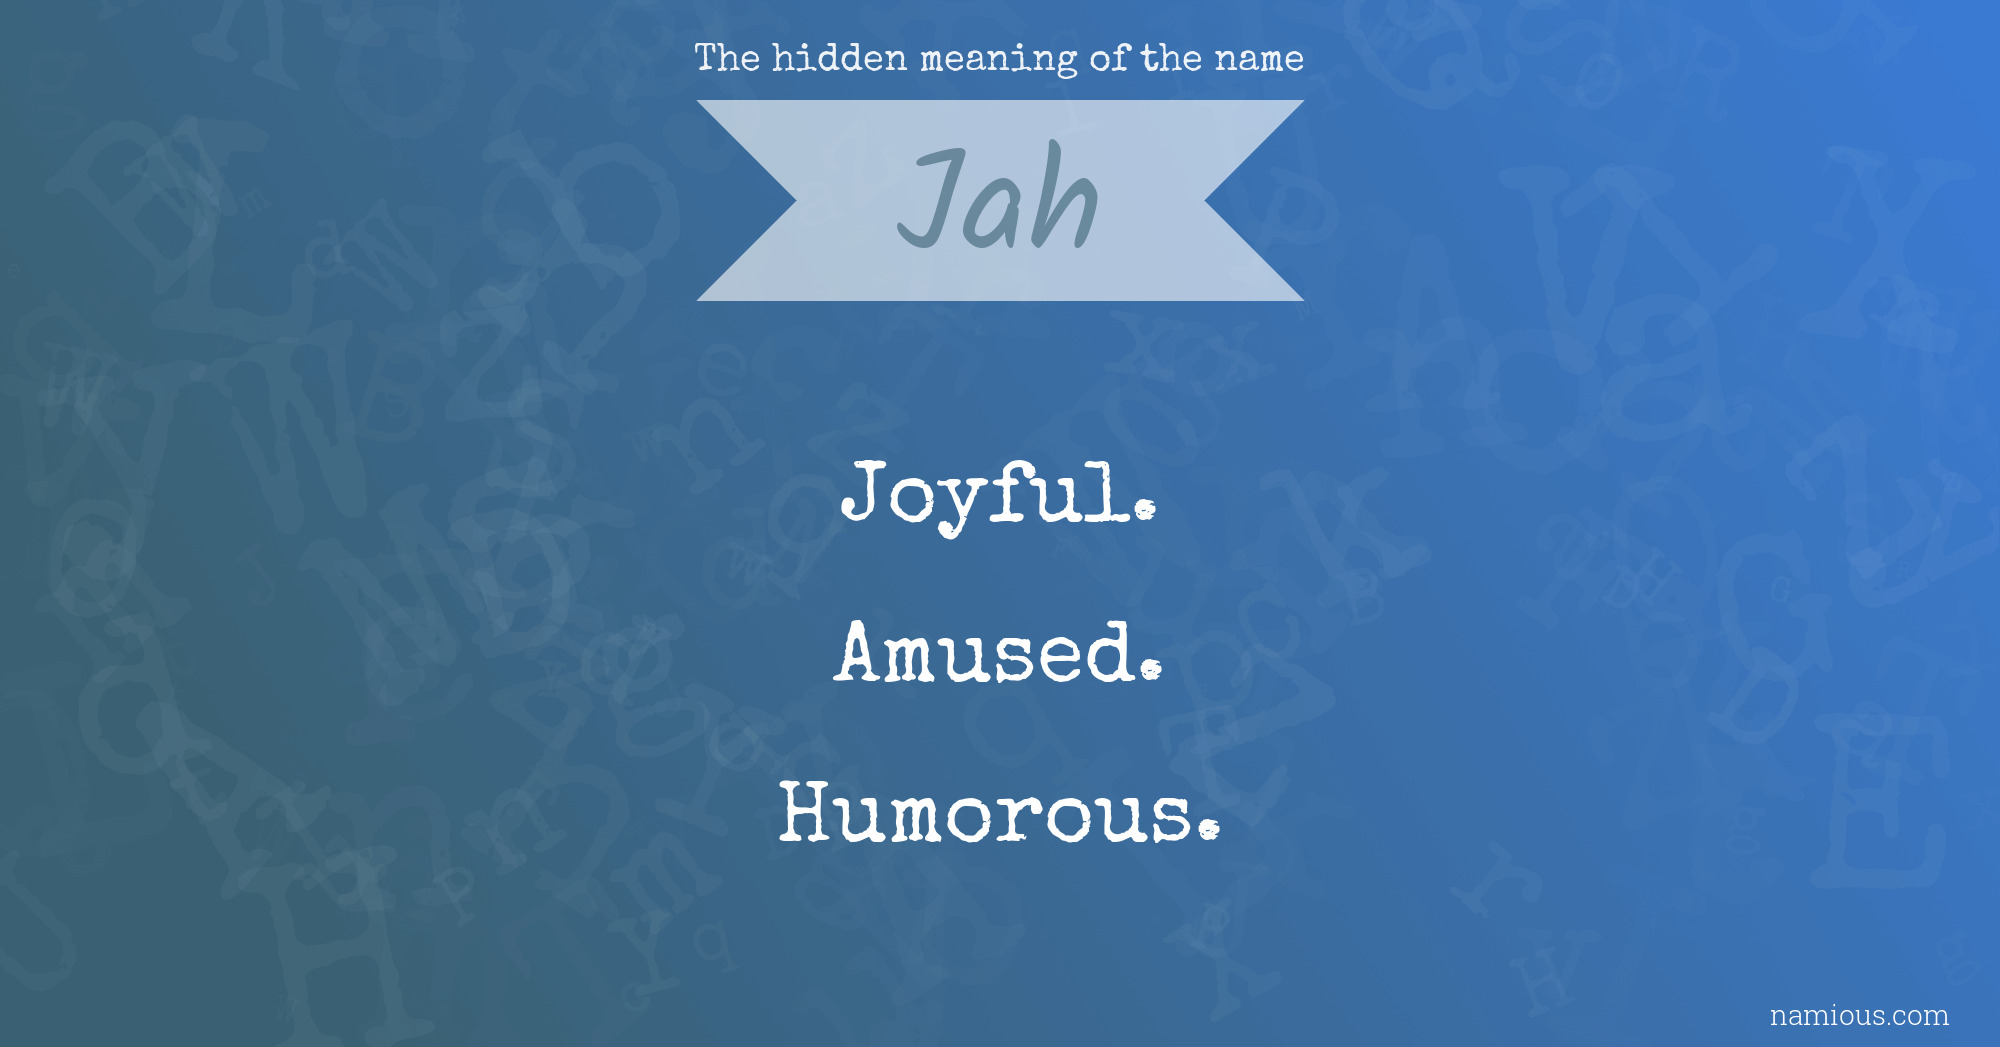 jah meaning